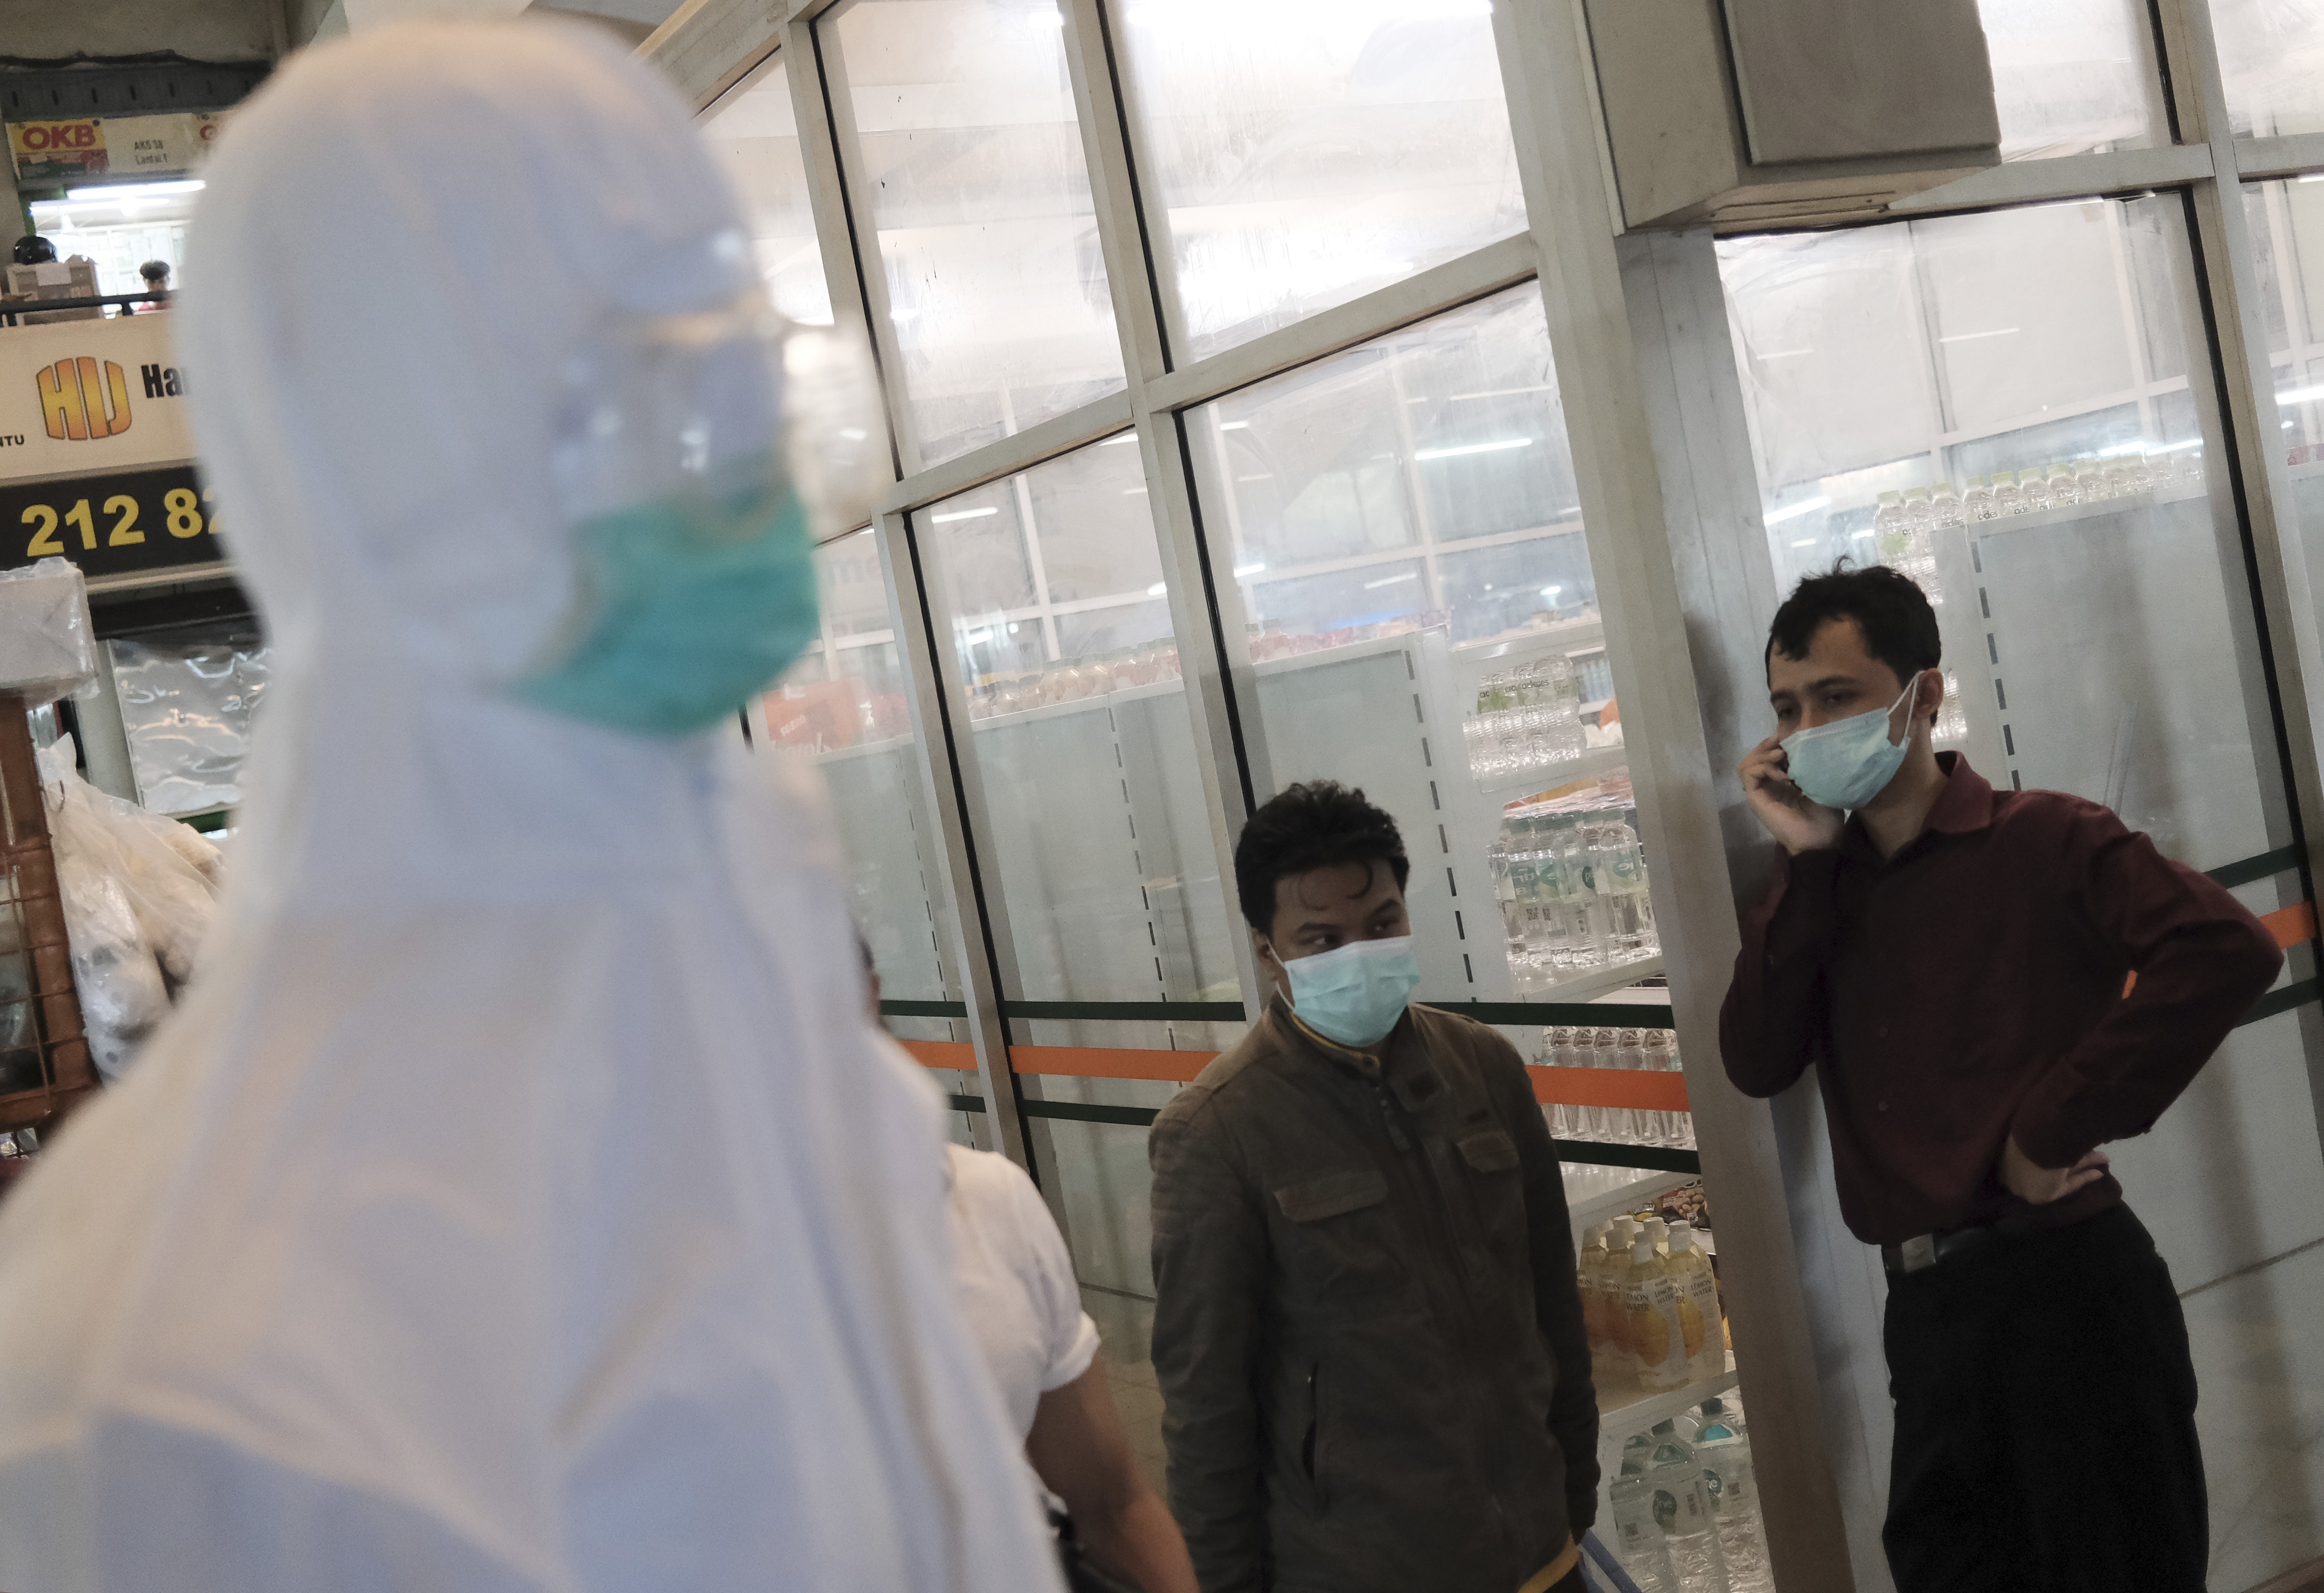 Men wearing face masks stand next to a mannequin in protective suit displayed at a shop that sells medical supplies at market in Jakarta, Indonesia, on Wednesday, March 4.